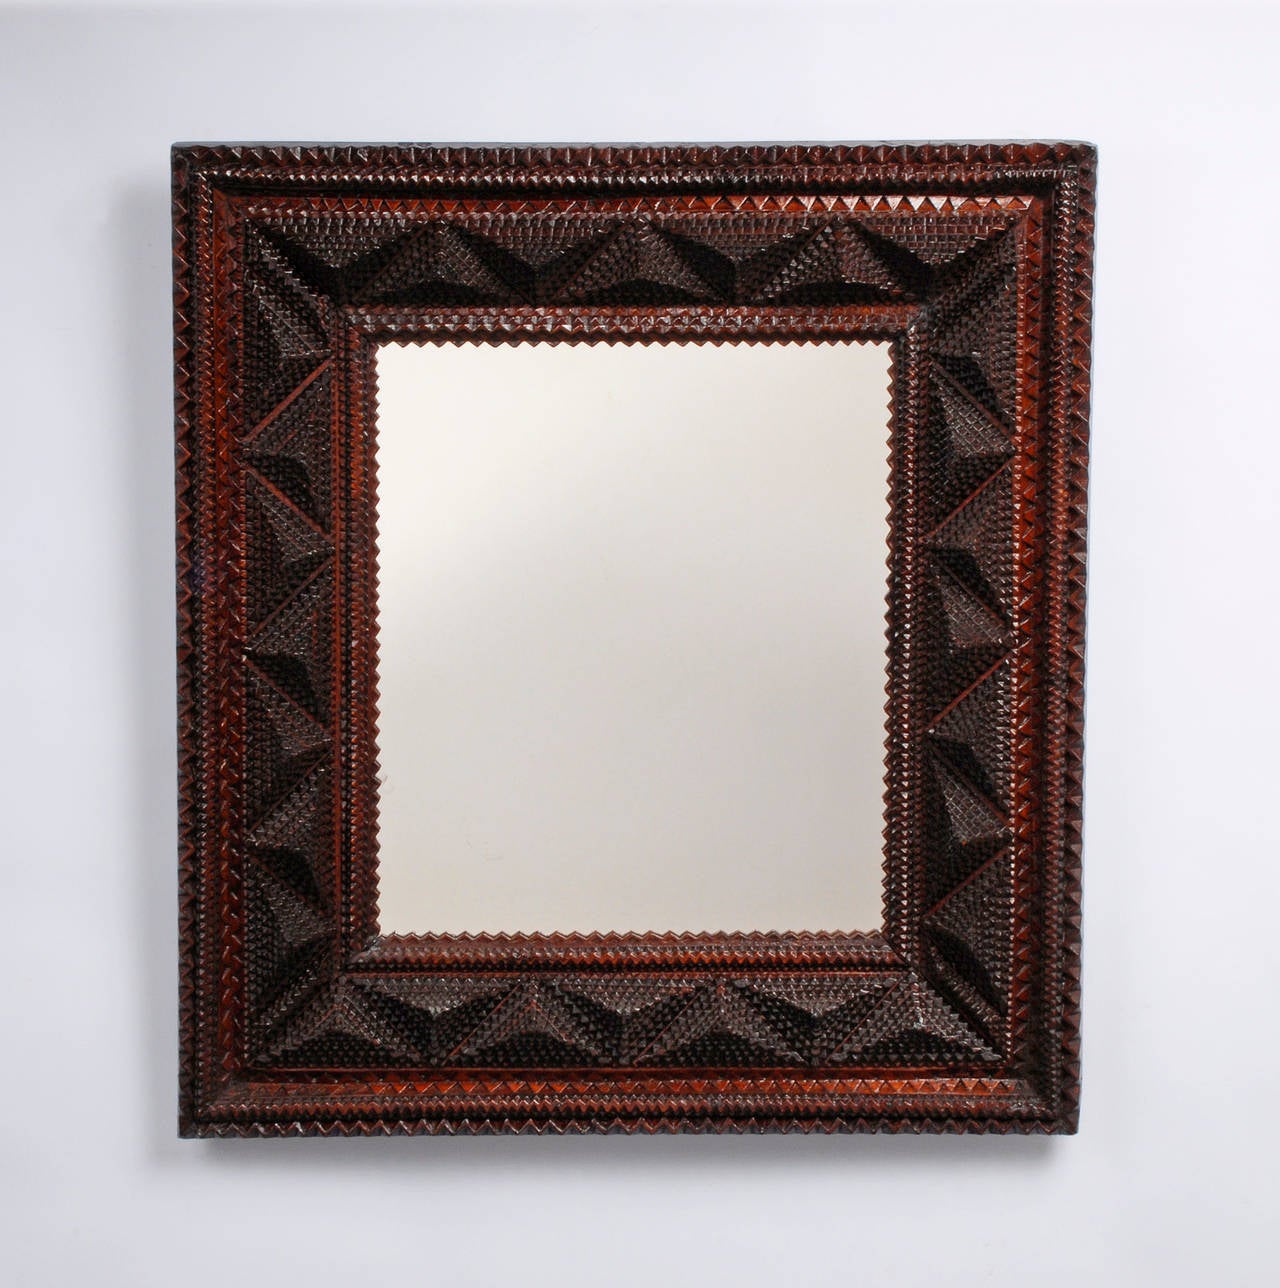 A fine deeply layered tramp art mirror heavily detailed with geometric patterning and a saw-tooth inner border. The frame has a shadow box like appearance with the sides canting forward. 

Circa 1915 - 1925